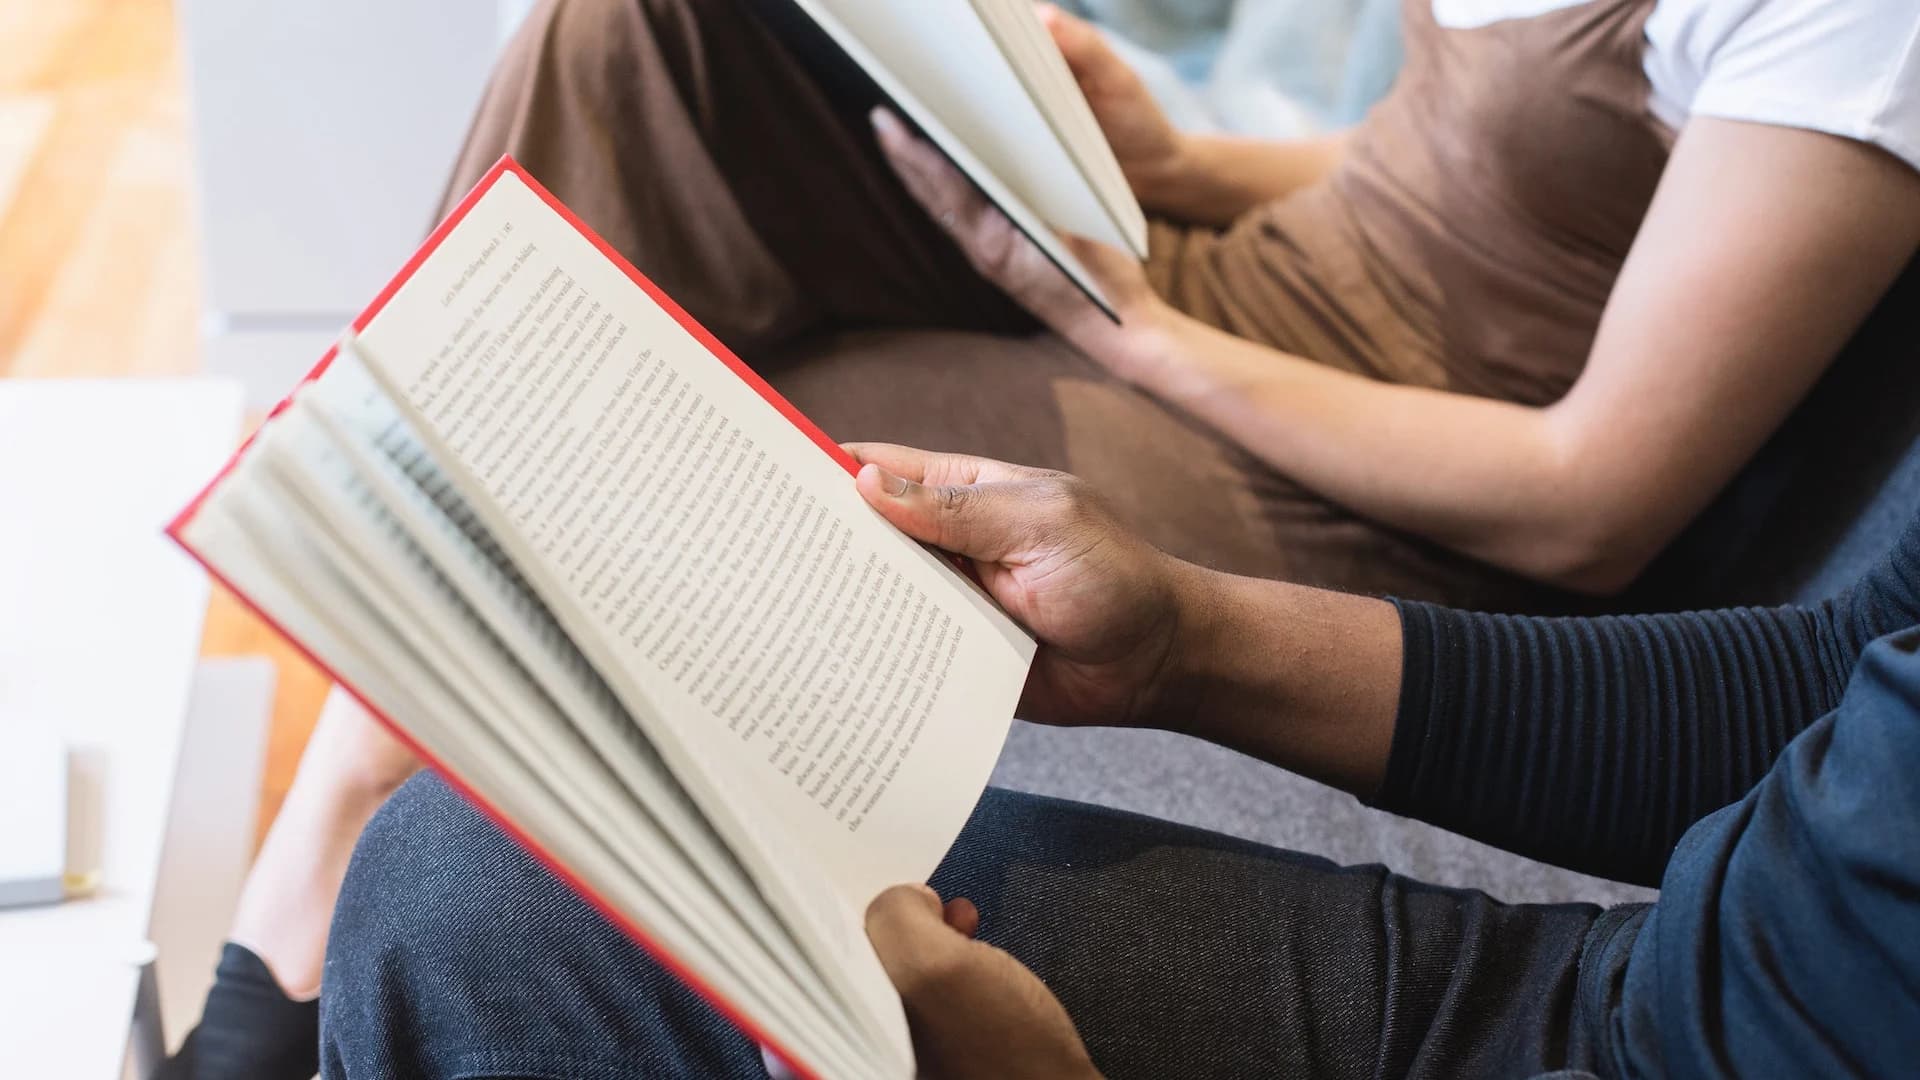 Falling behind on your 2021 reading list? This training helps you read faster and retain more